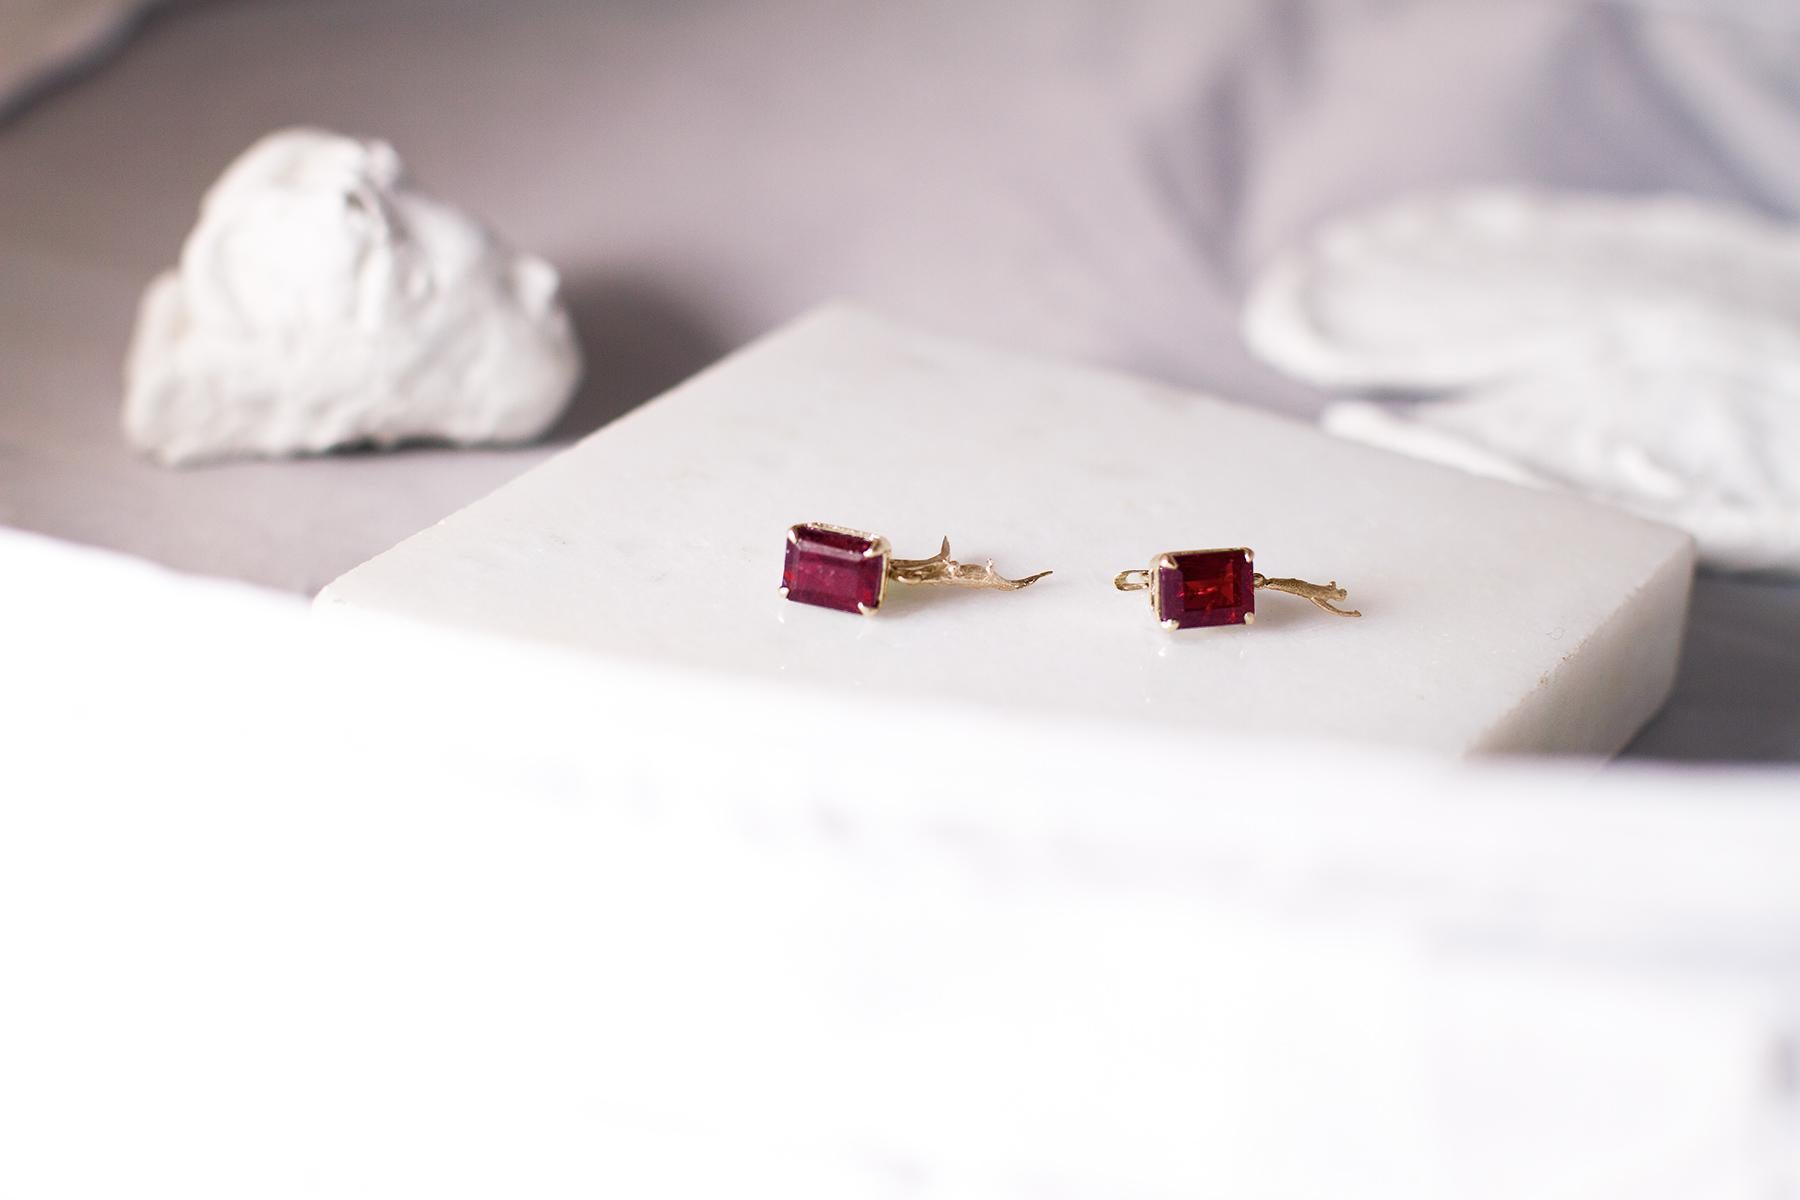 These contemporary clip-on earrings with rubies (11x9 mm each, rectangular cut) belong to Tea collection, which was featured in Vogue UA published issue. These earrings are made of 18 Karat yellow gold and designed by the oil painter from Berlin,